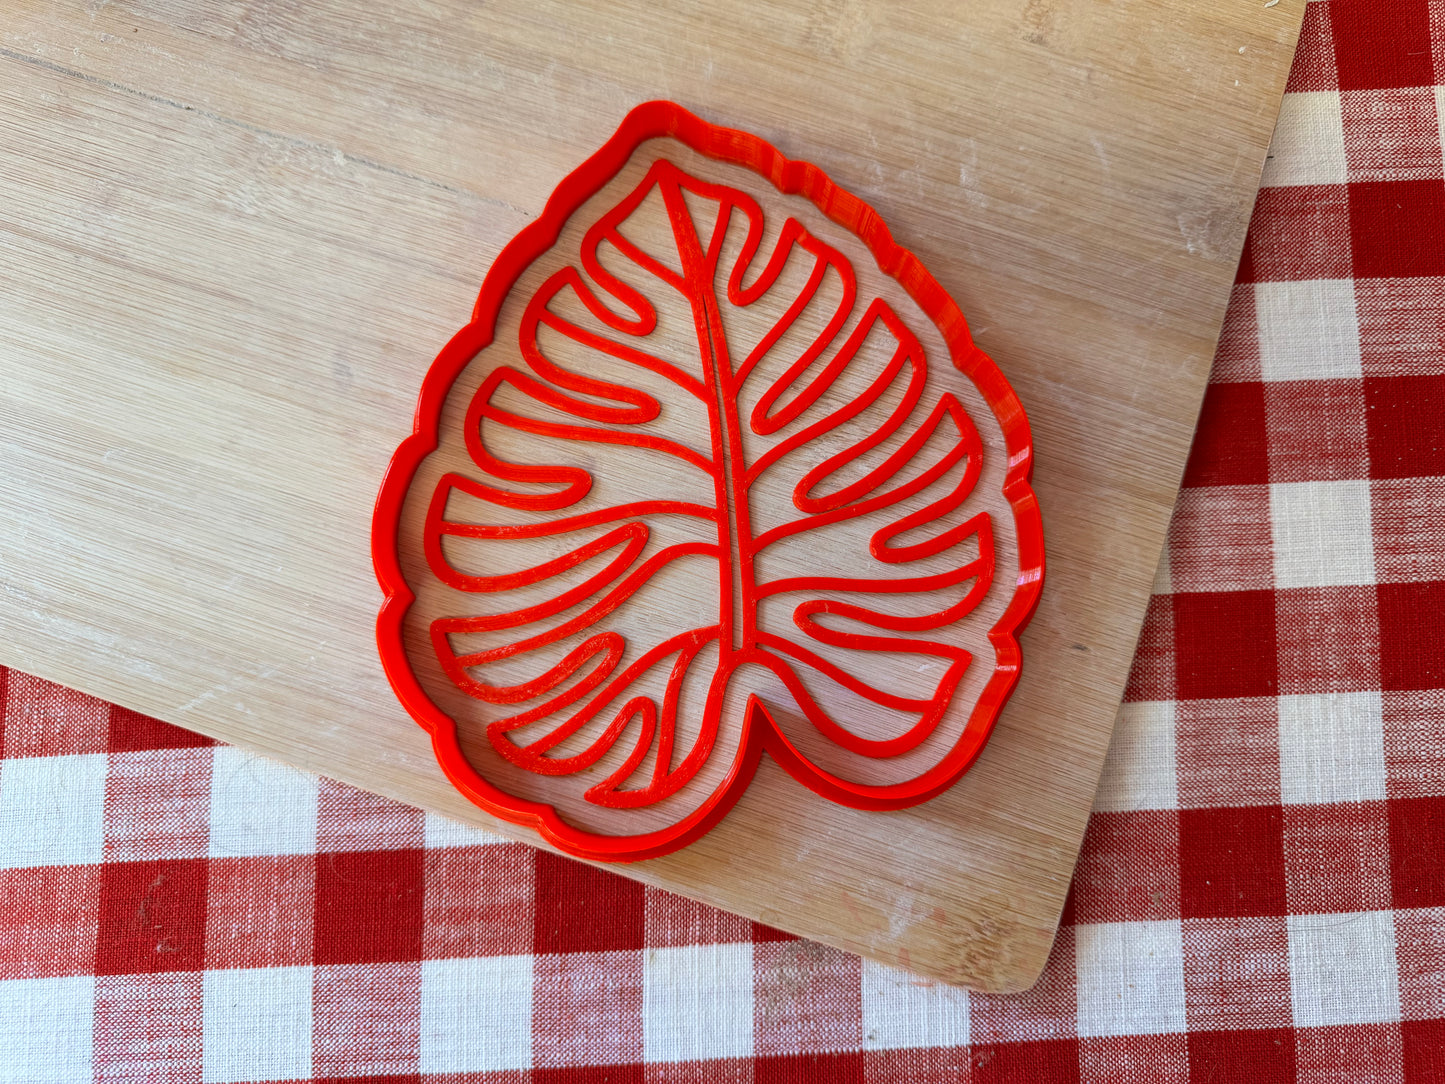 Monstera Design, Pottery Stamp or Stencil w/ optional cutter - plastic 3d printed, multiple sizes available